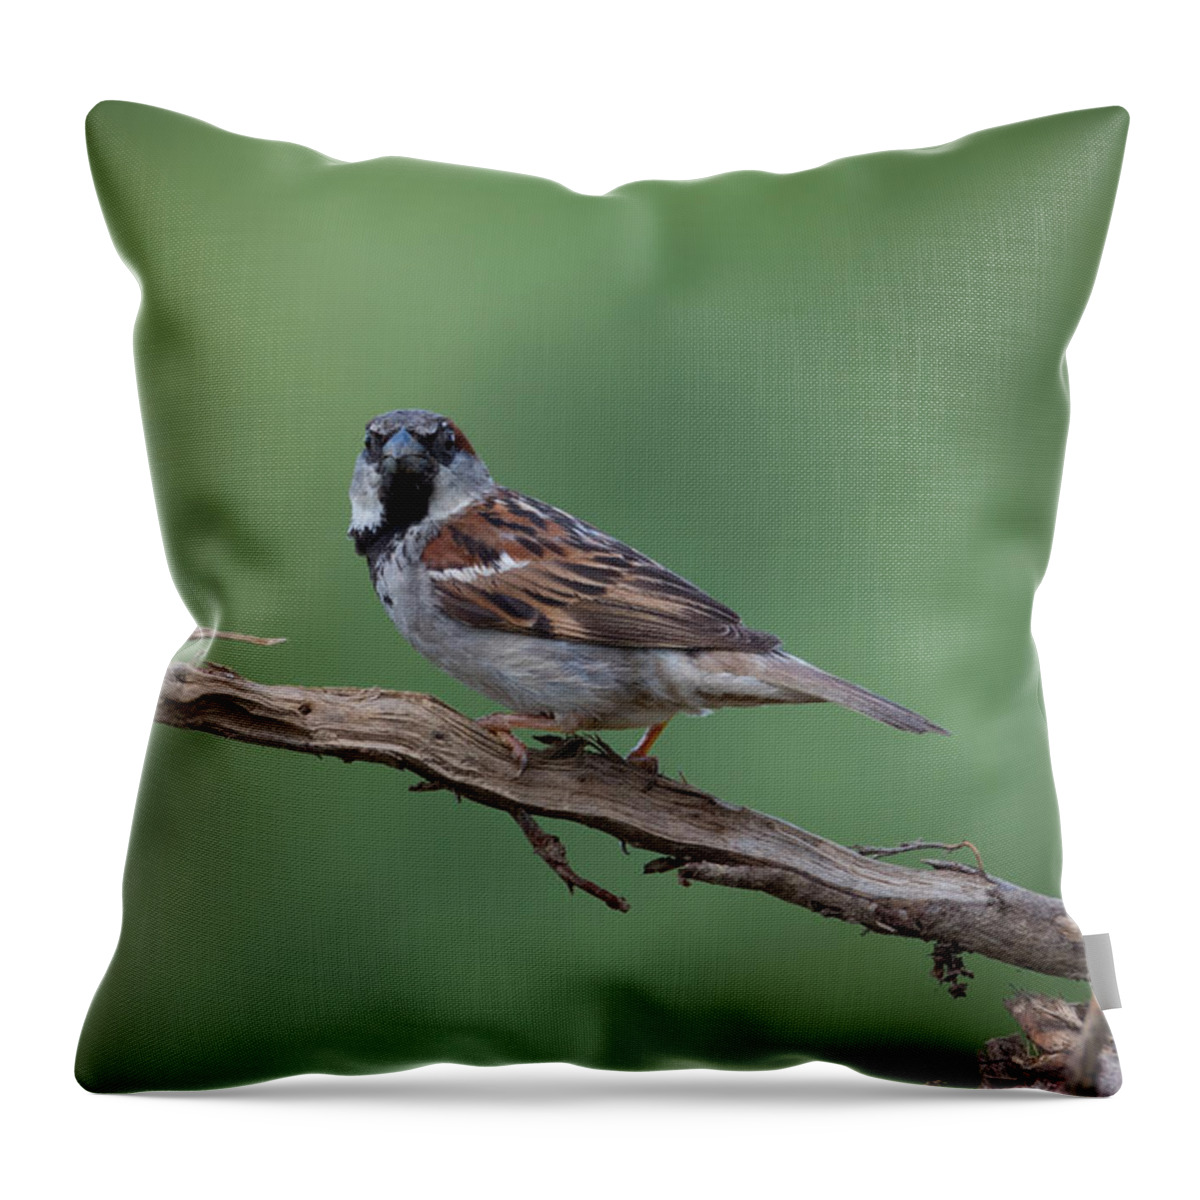 House Sparrow Throw Pillow featuring the photograph House Sparrow by Holden The Moment